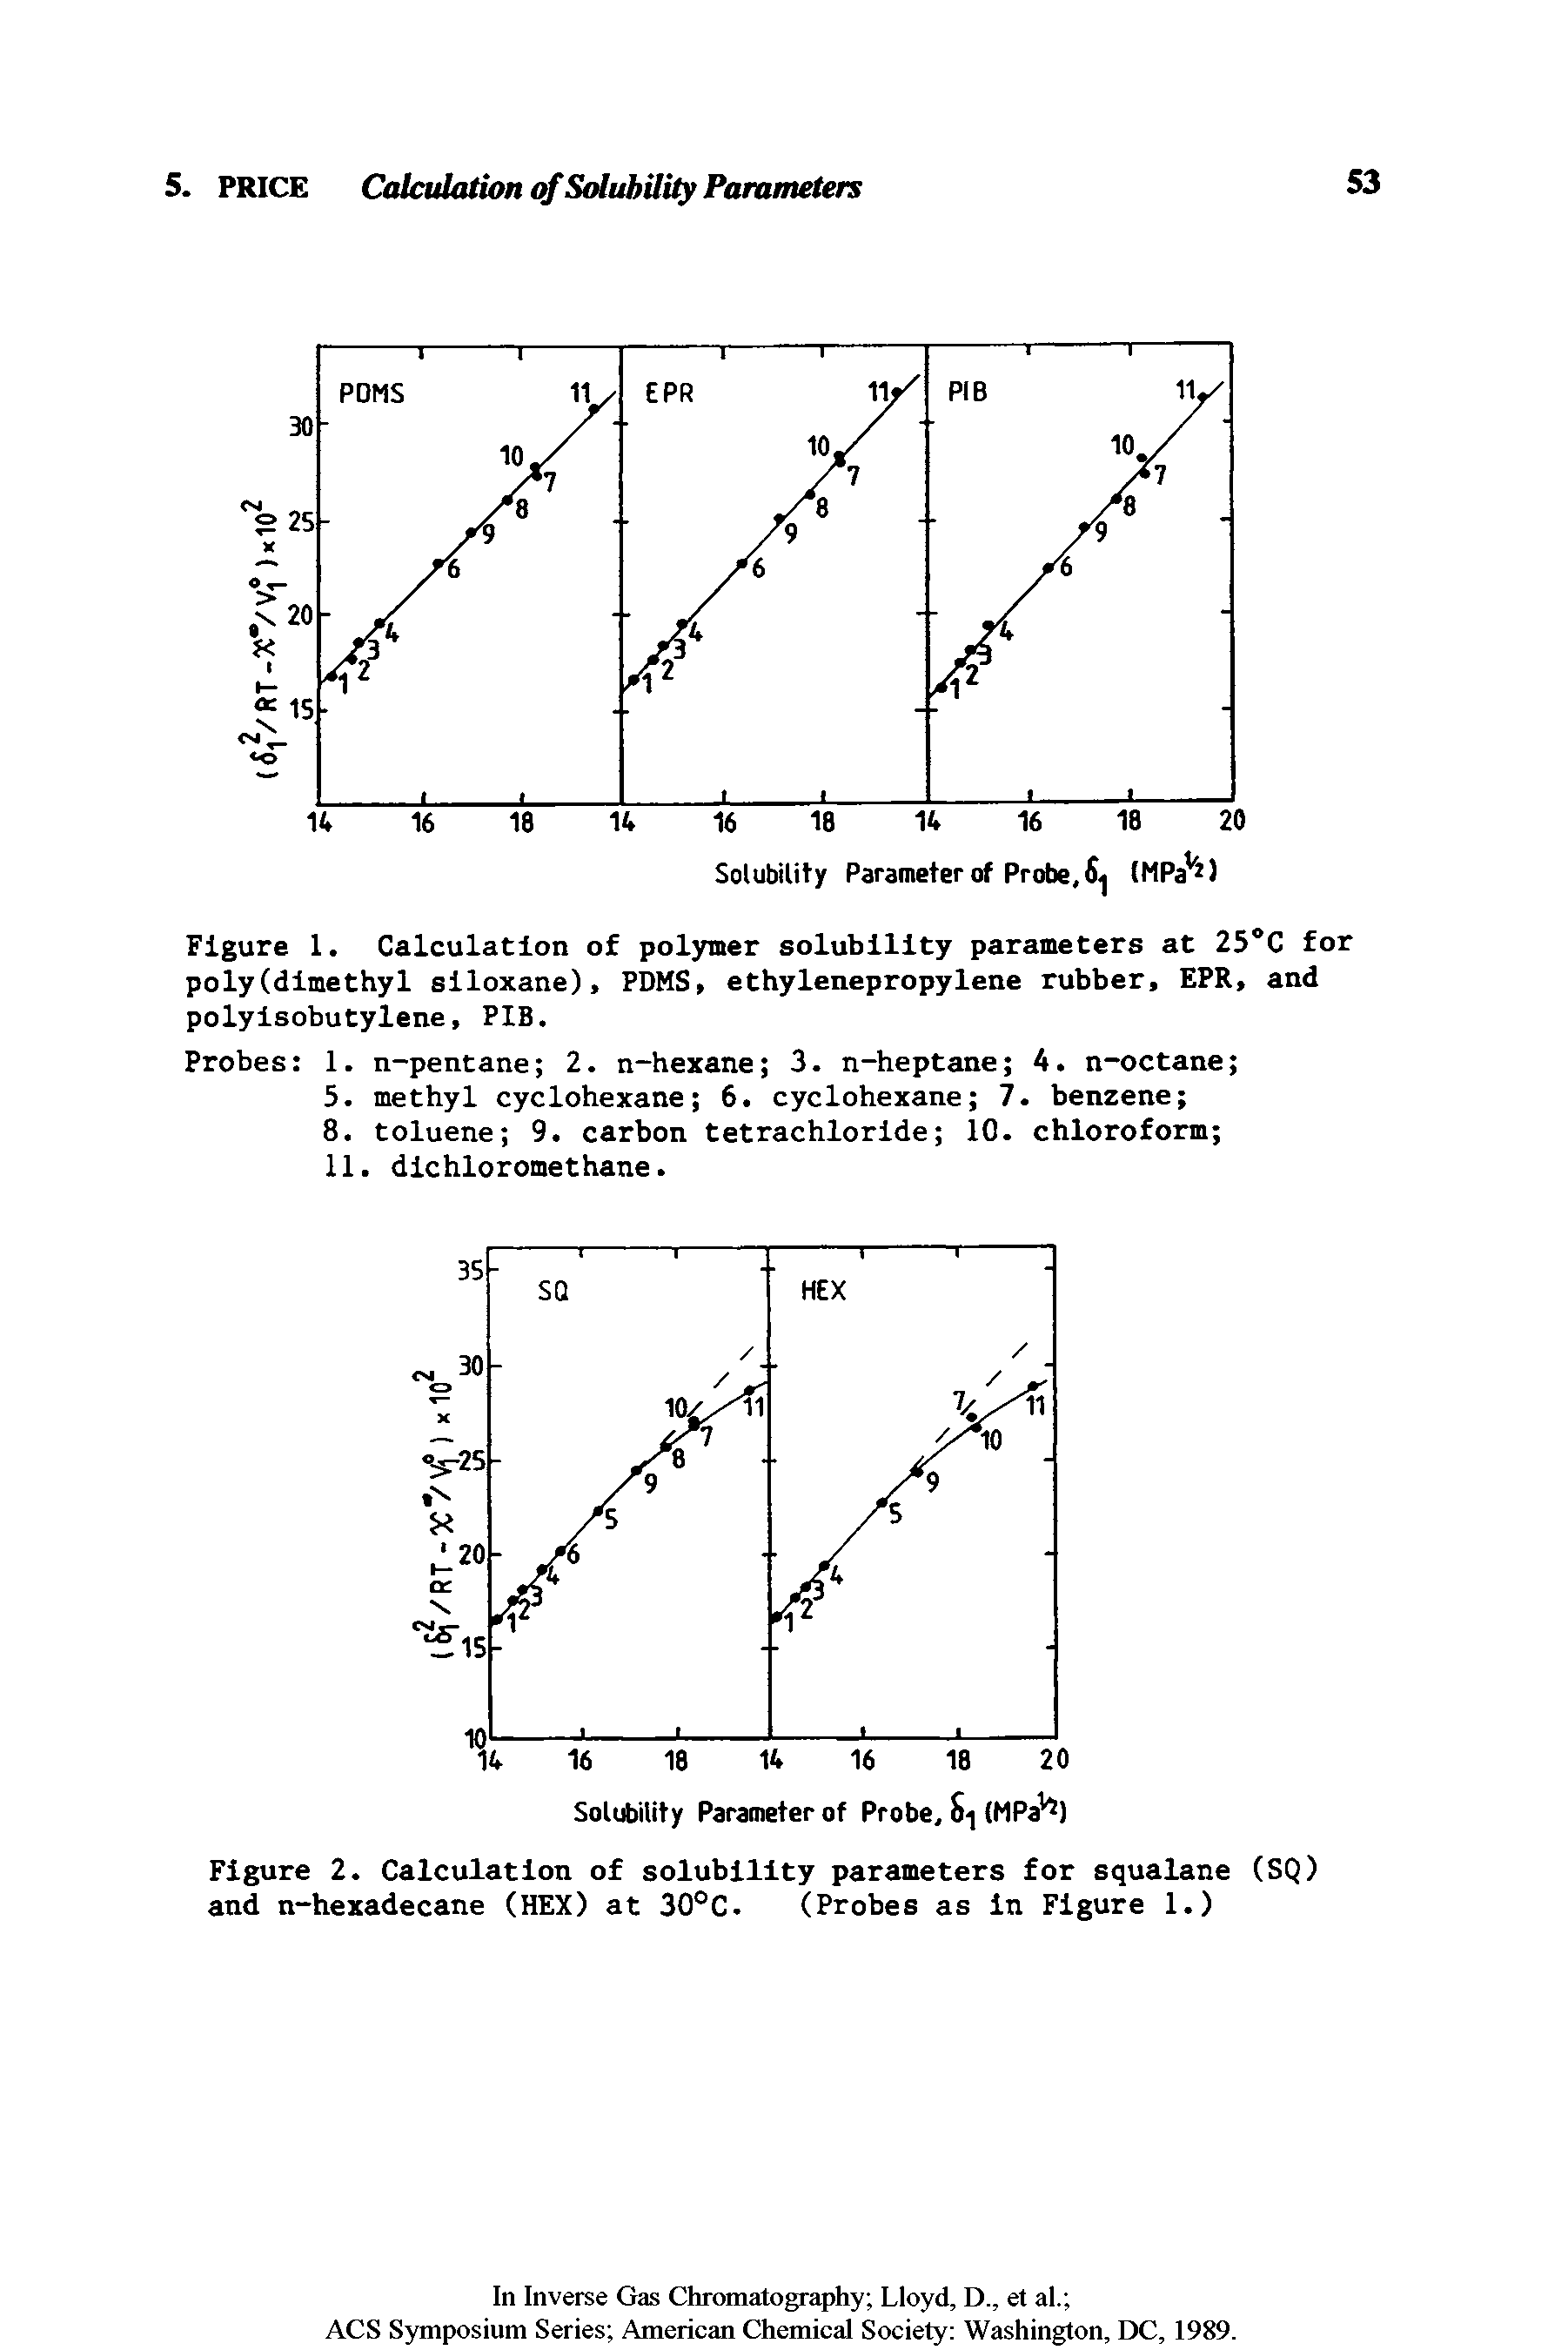 Figure 1. Calculation of polymer solubility parameters at 25°C for poly(dimethyl siloxane), PDMS, ethylenepropylene rubber, EPR, and polyisobutylene, PIB.